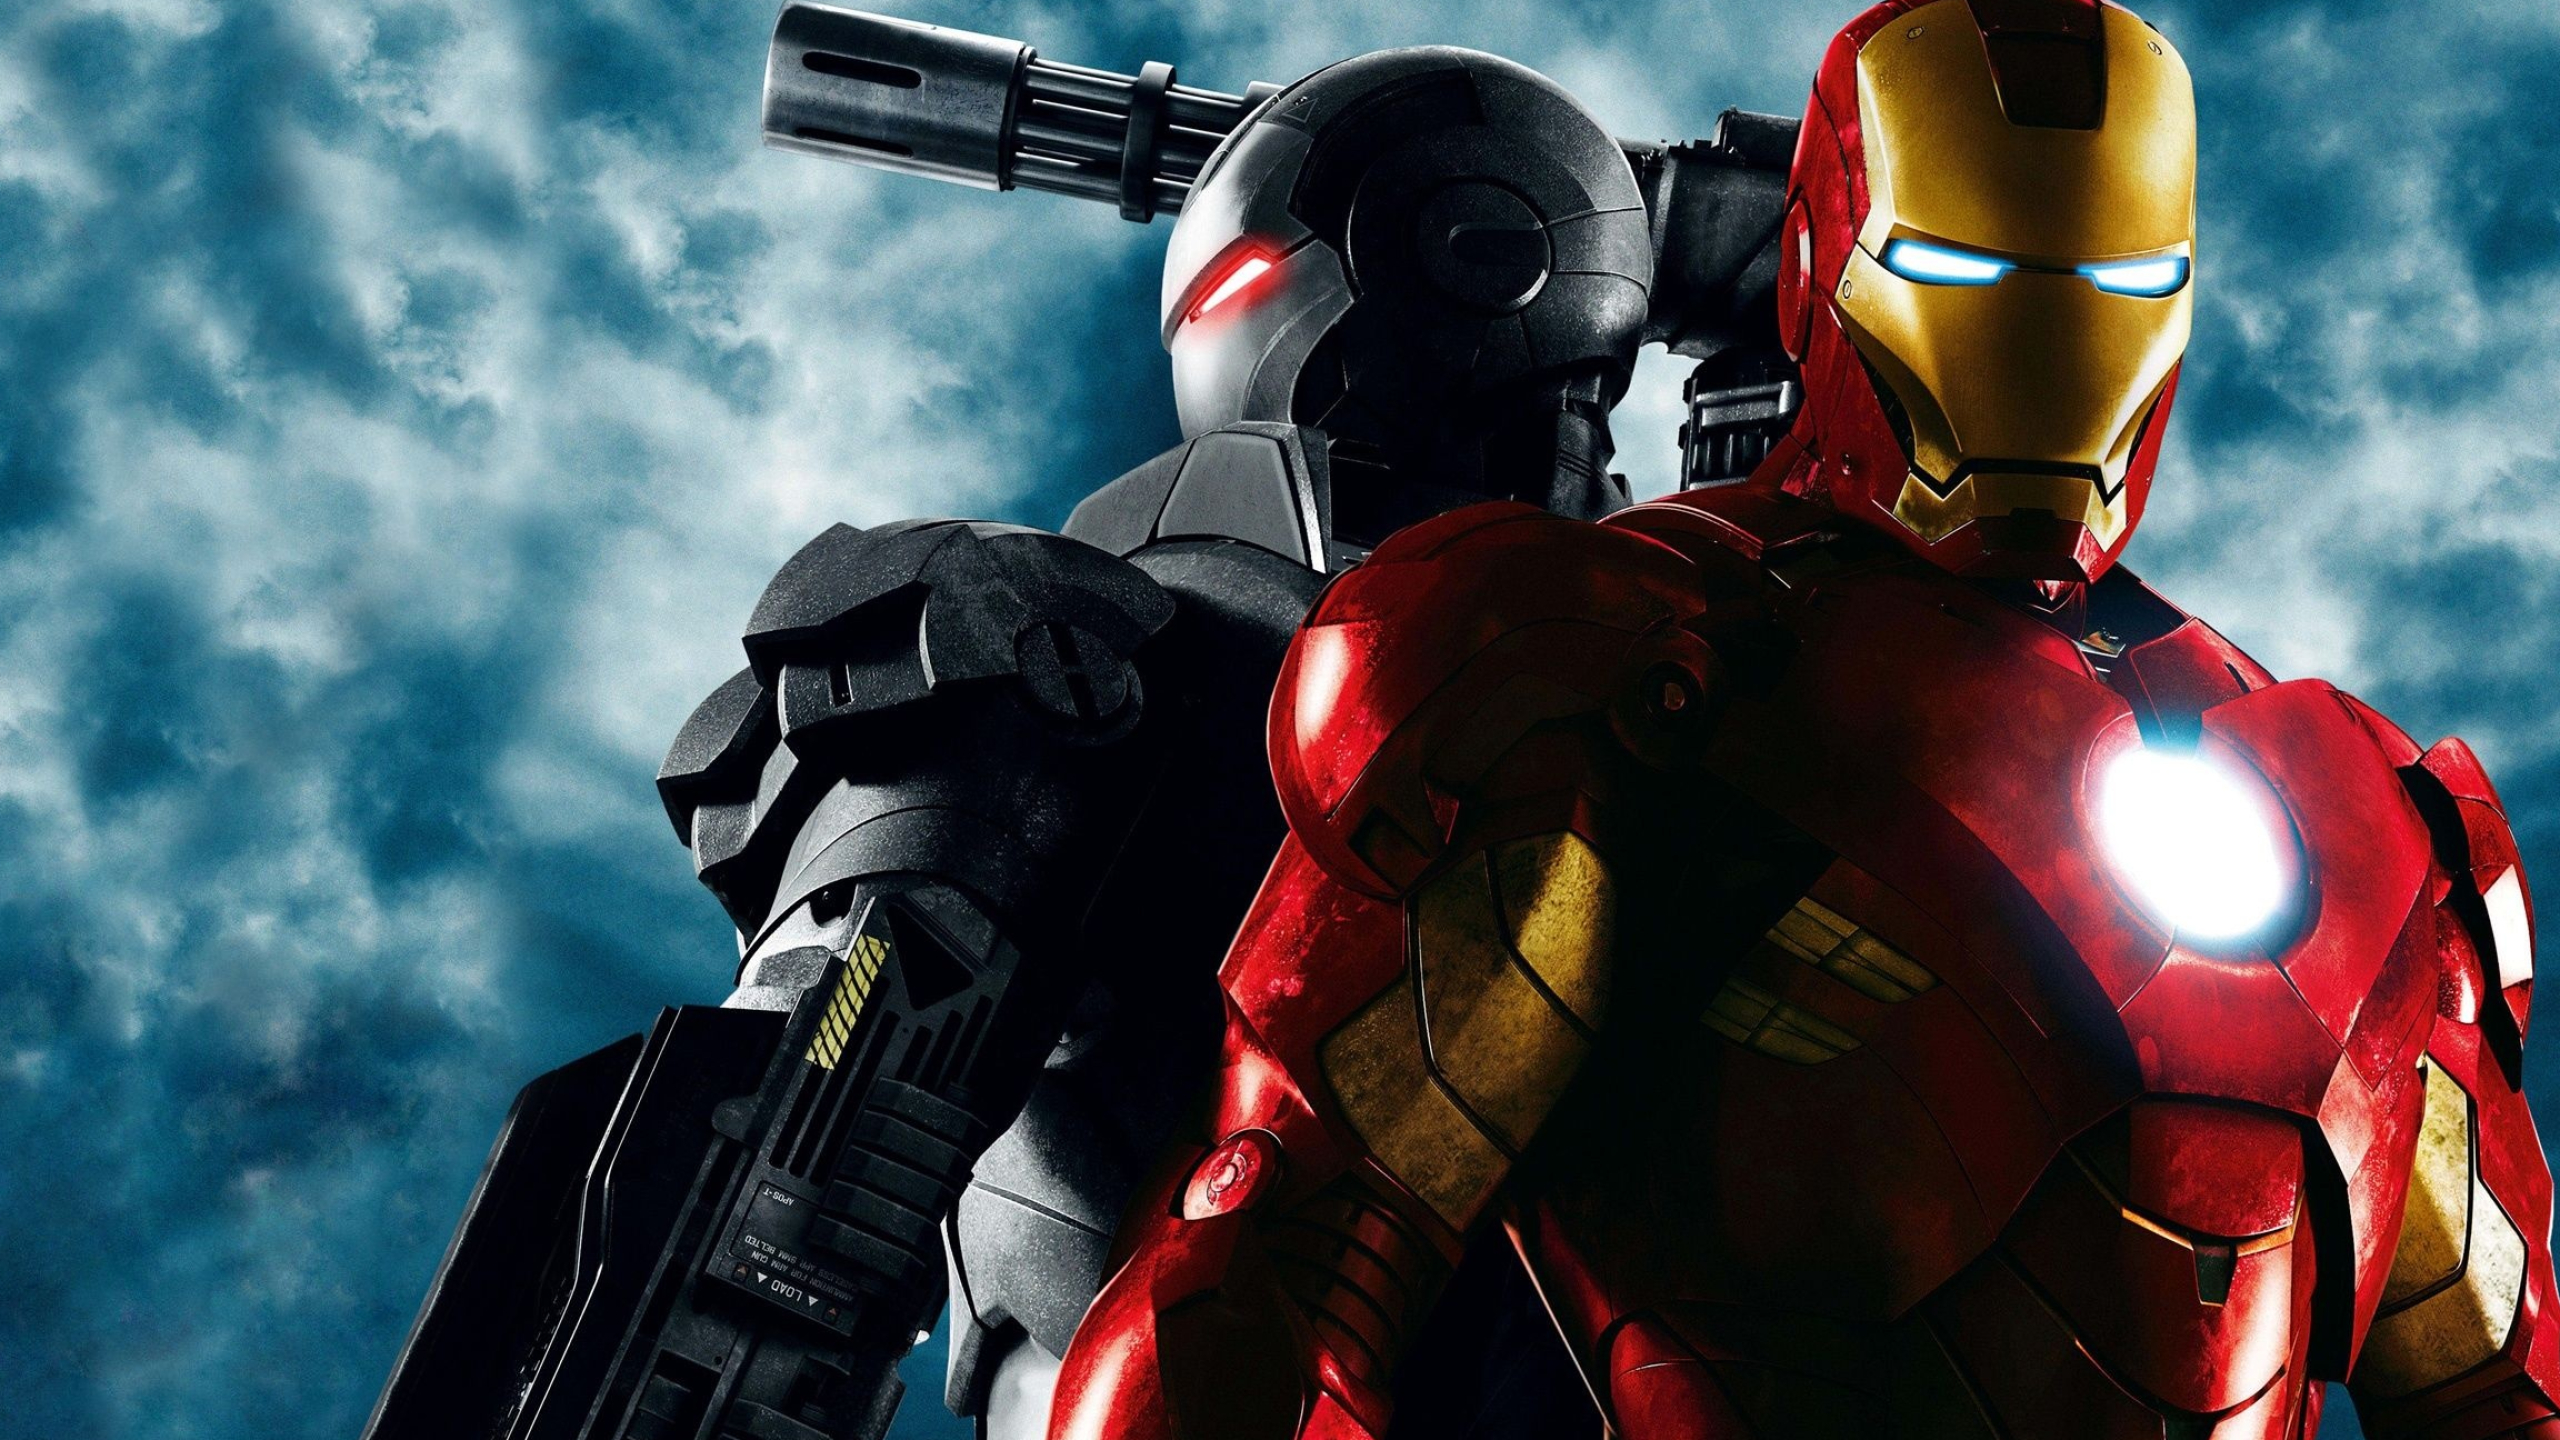 Iron Man: A 2010 American superhero film, The third film in the Marvel Cinematic Universe. 2560x1440 HD Background.